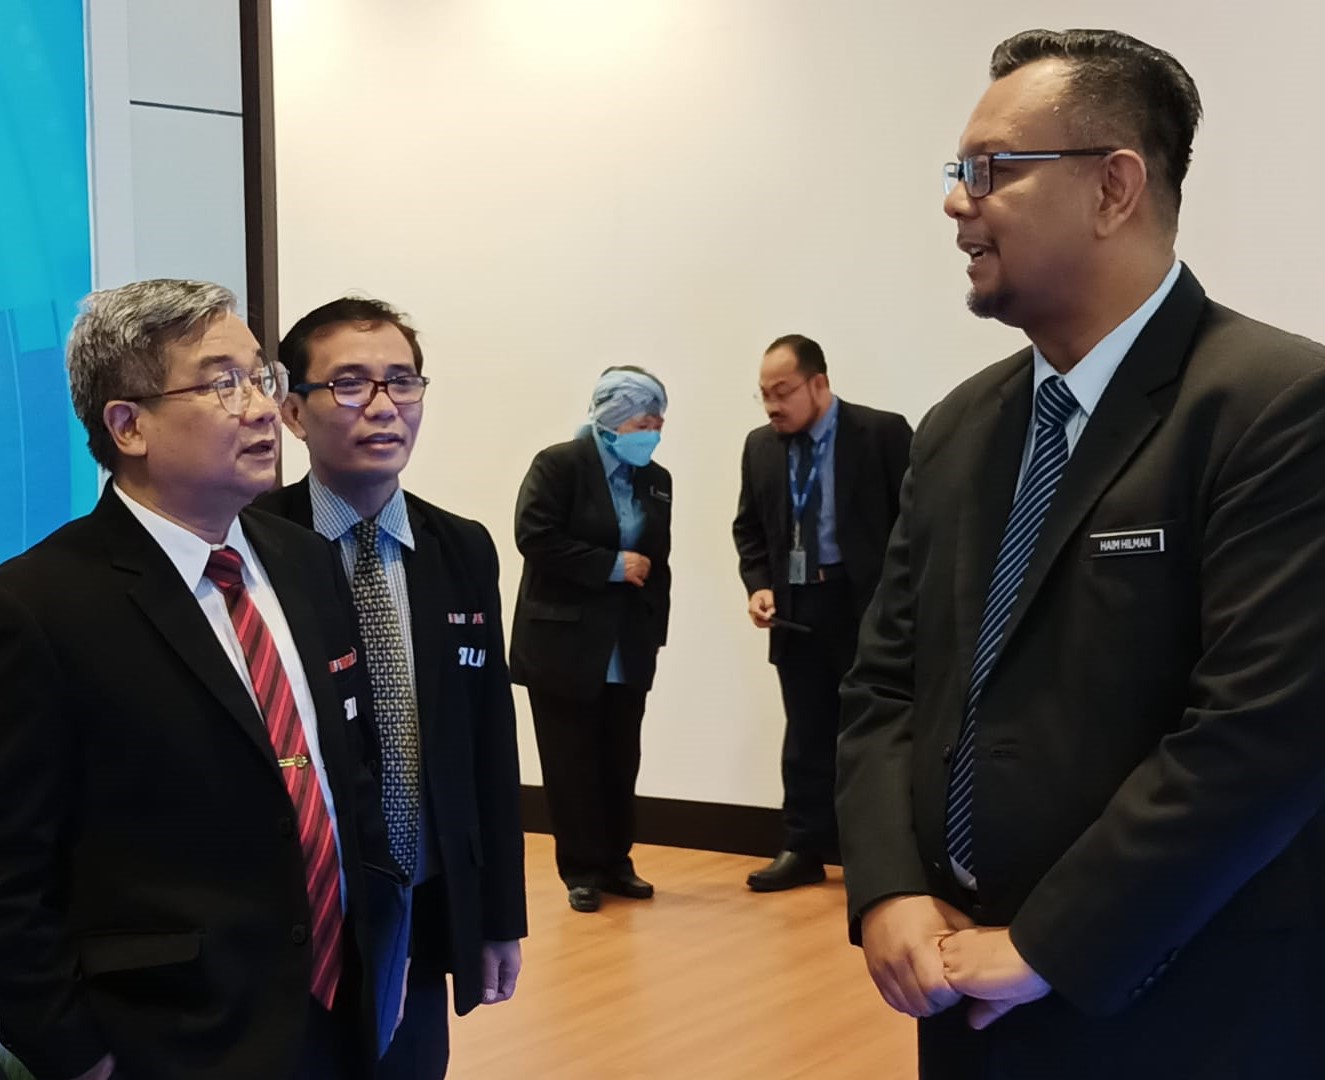 UUM and UAI Collaborate to Advance Science in MoU Signing